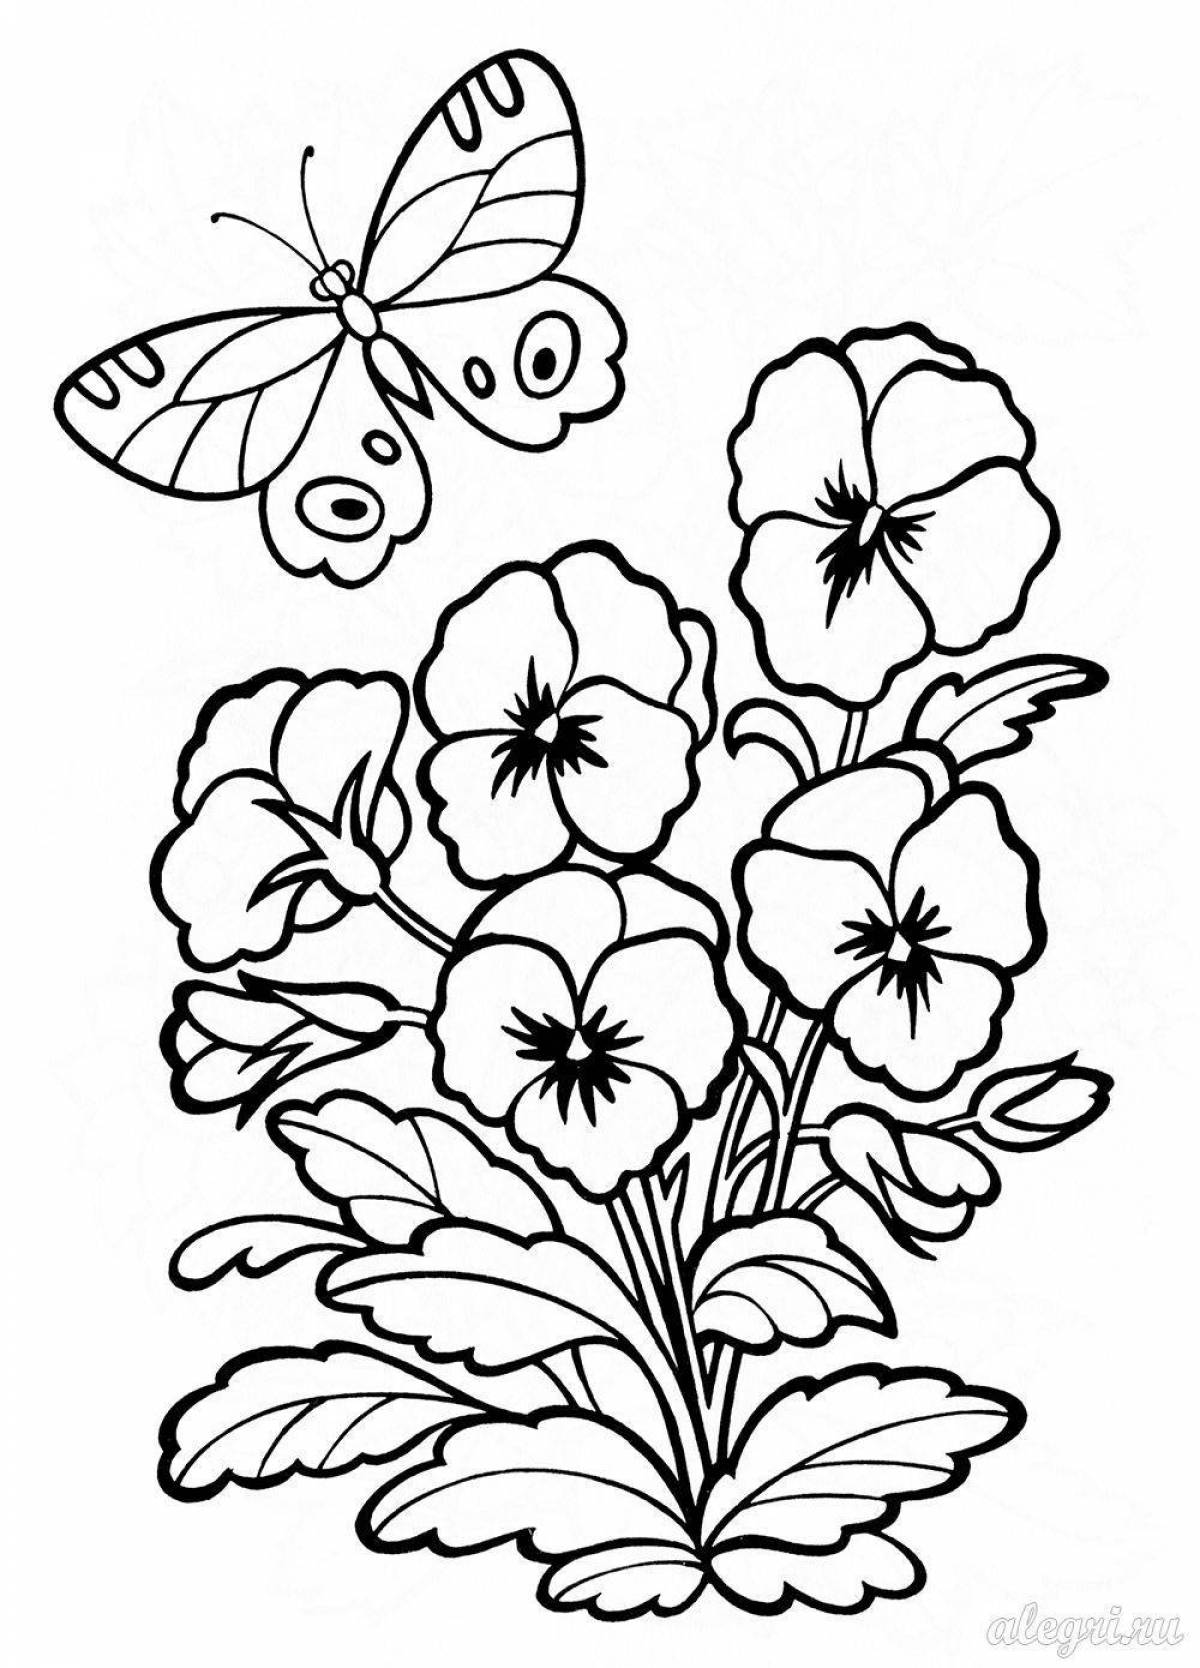 Fun coloring flowers for children 4-5 years old